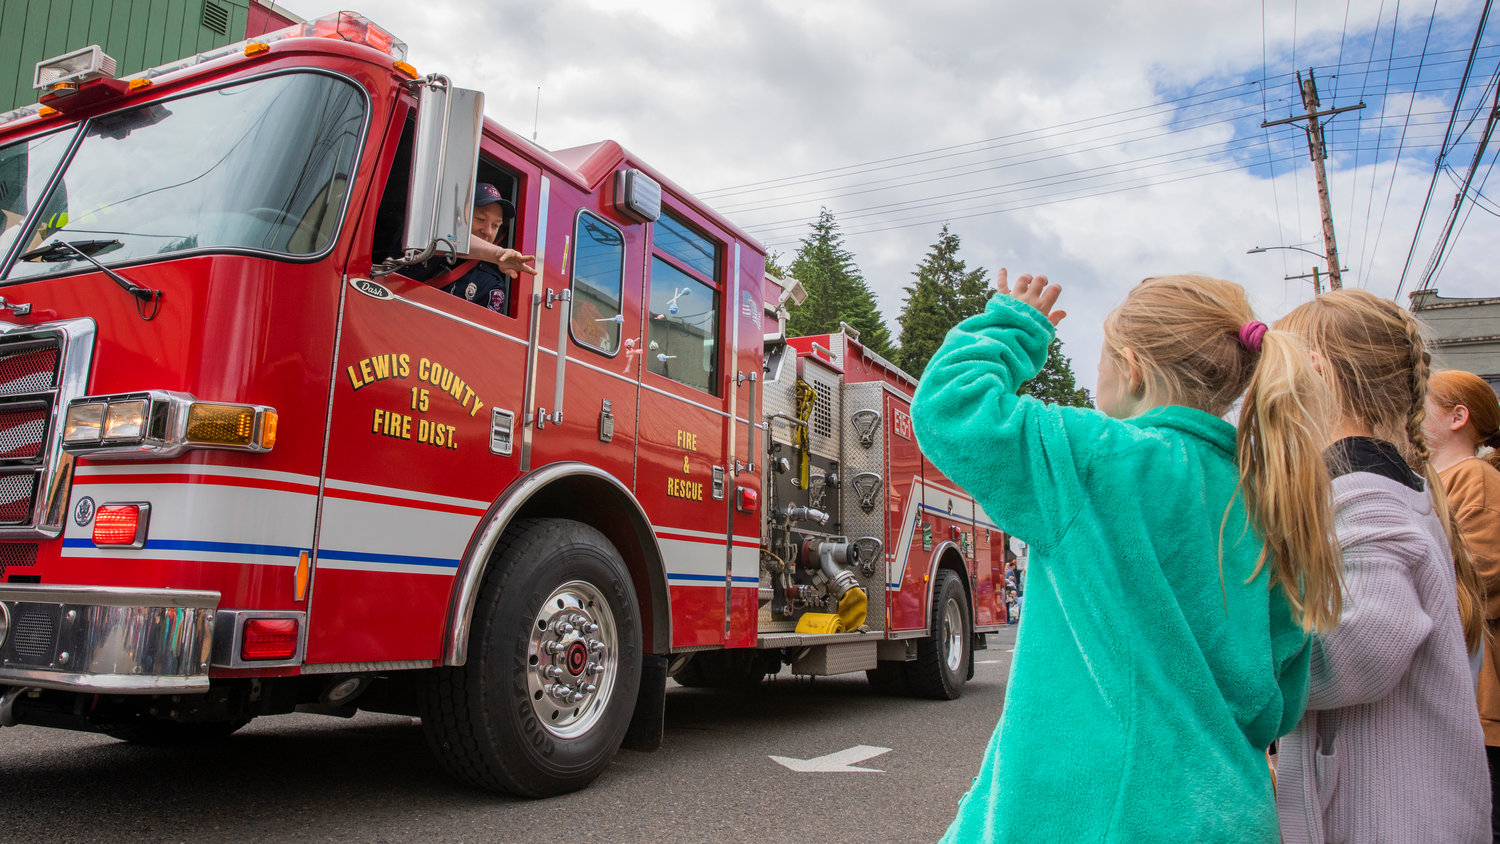 Members of Lewis County Fire District 15 throw candy during the Egg Days Festival parade in Winlock on Saturday.